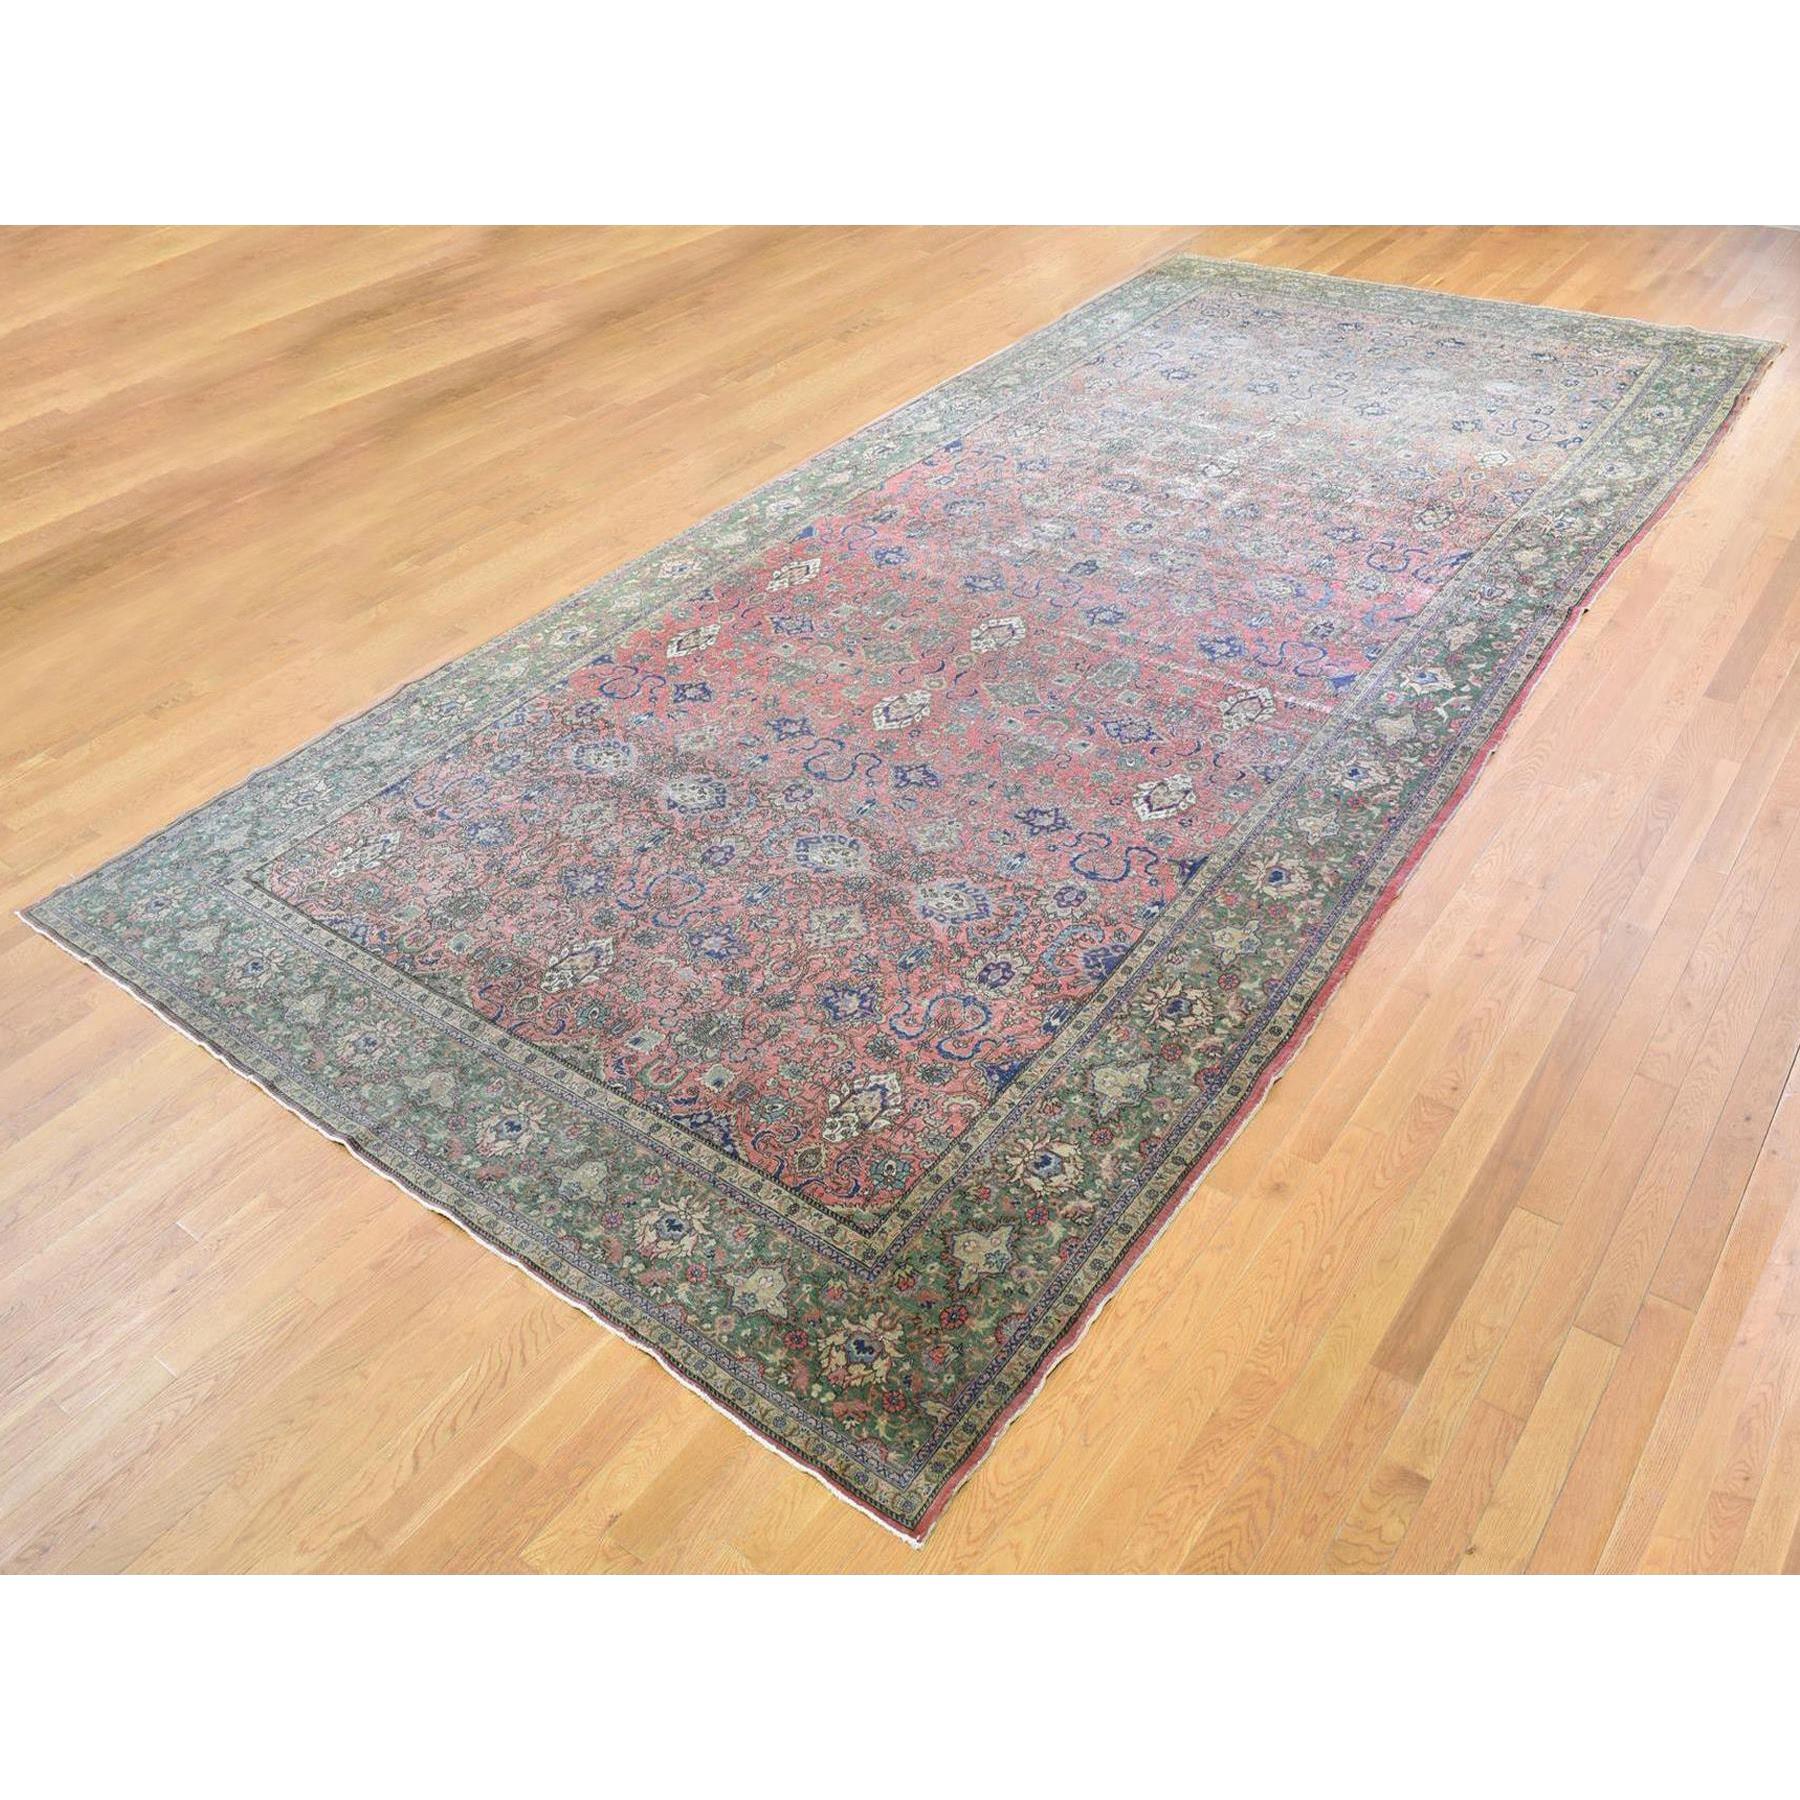 This fabulous hand-knotted carpet has been created and designed for extra strength and durability. This rug has been handcrafted for weeks in the traditional method that is used to make
Exact Rug Size in Feet and Inches : 9'2